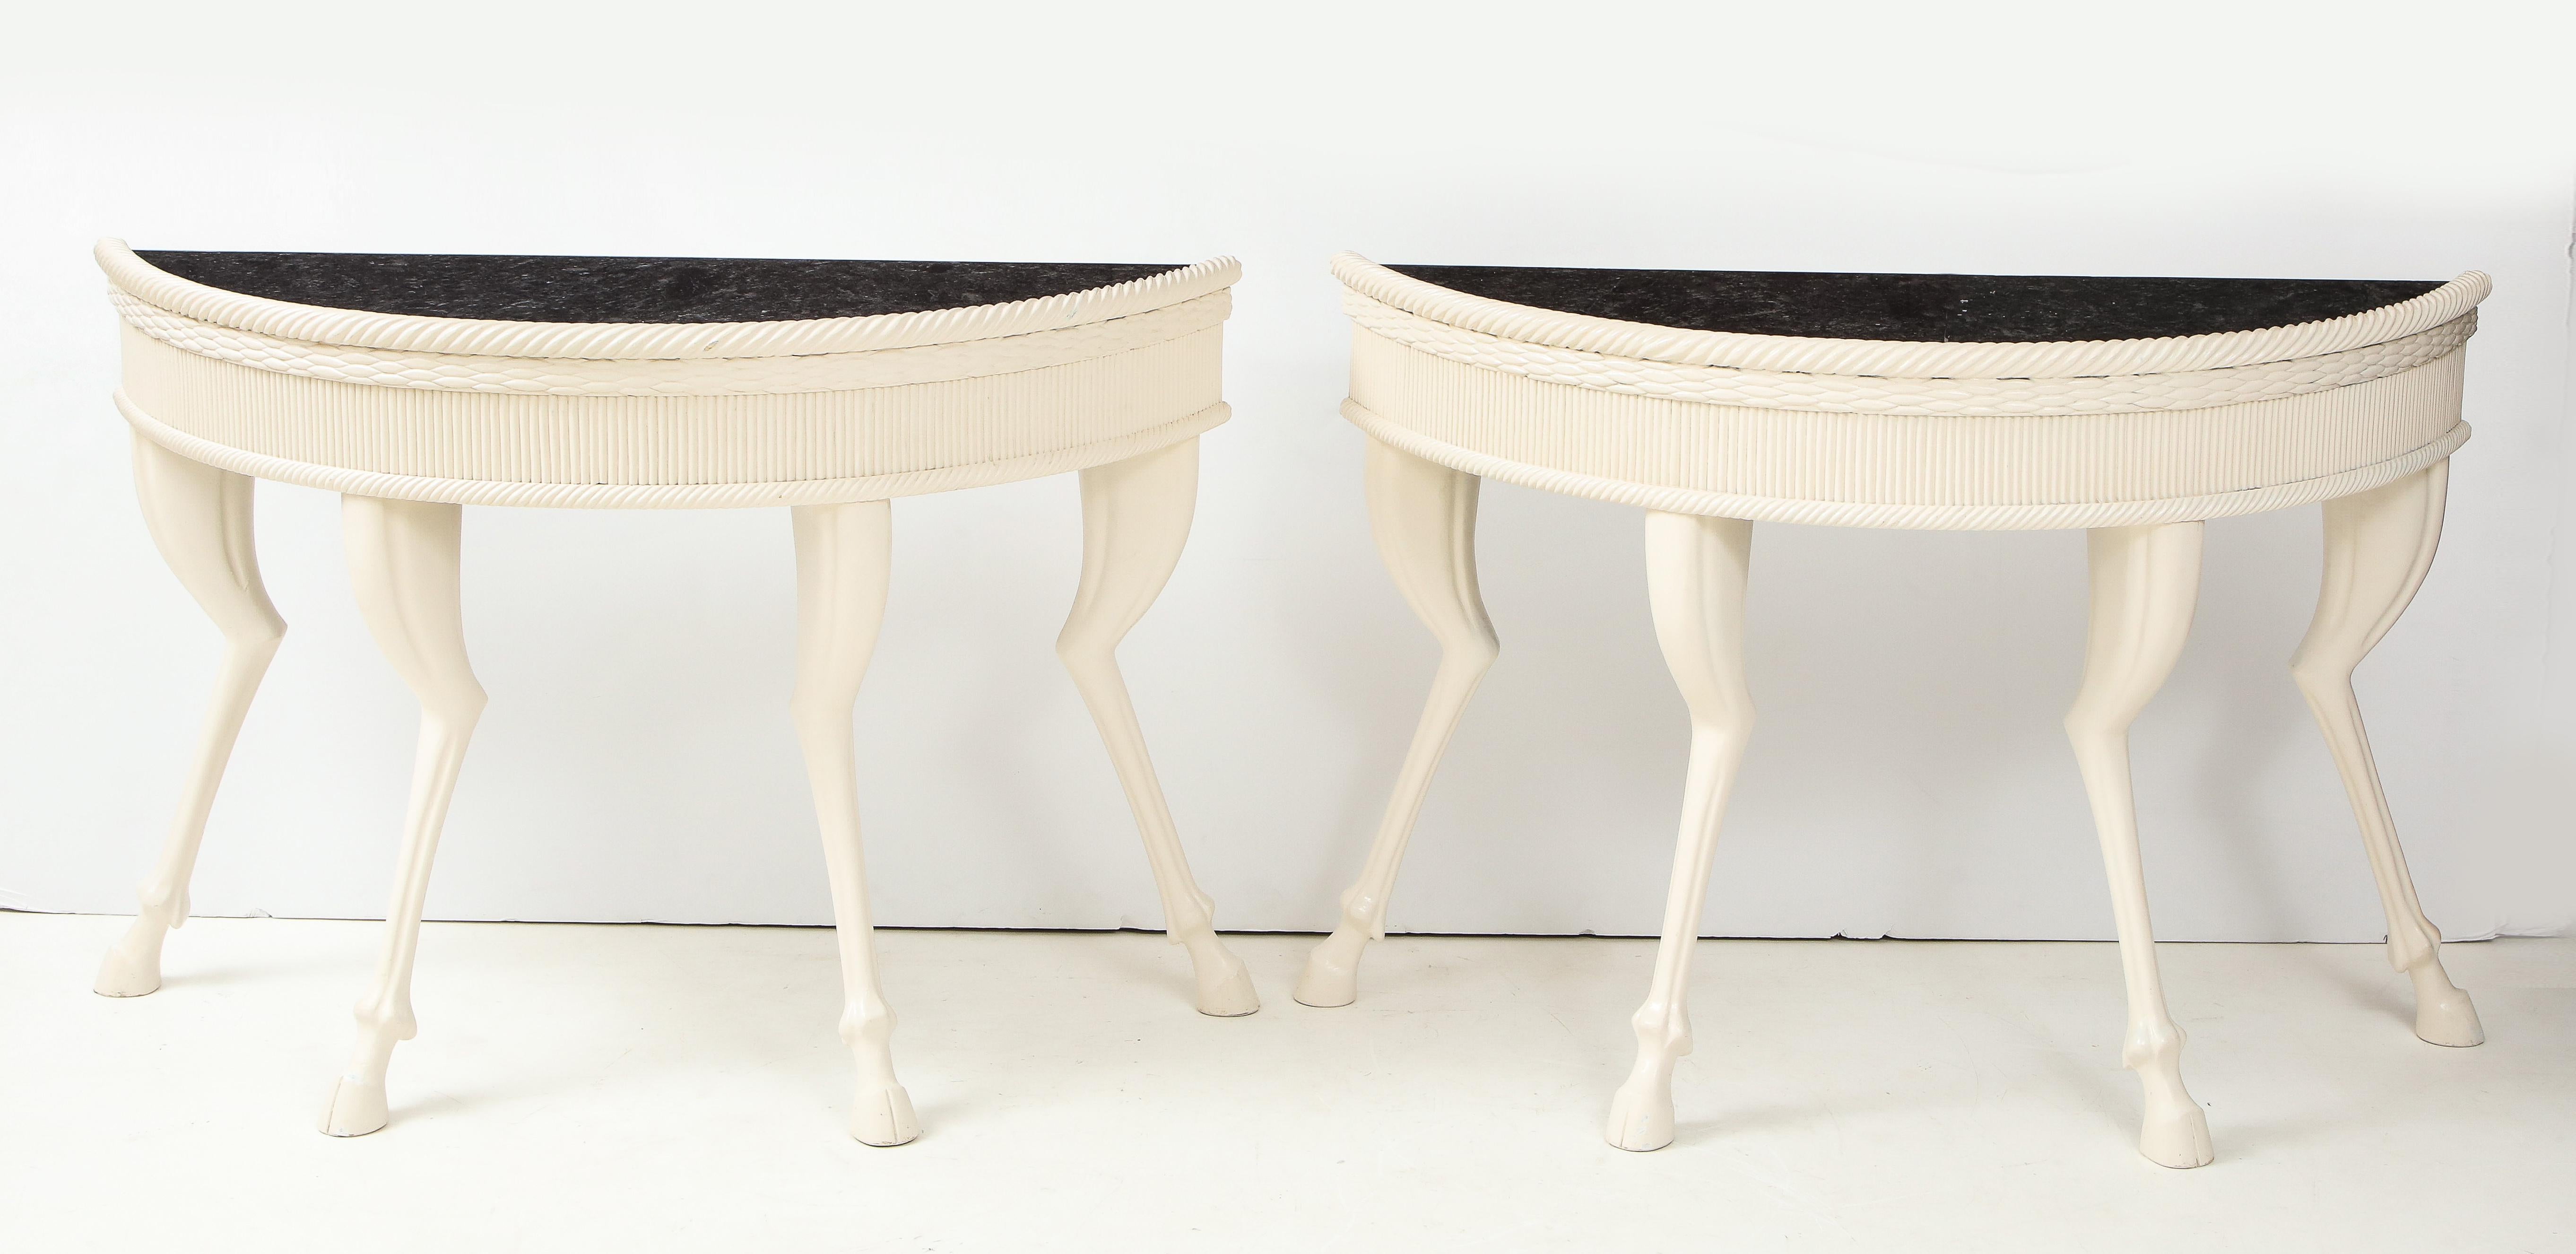 Wonderful pair of large demilune hoof foot console tables.
The wooden tables are supported by detailed legs and are in a white matte lacquered finish.
The marble tops slide into a recessed groove.
  